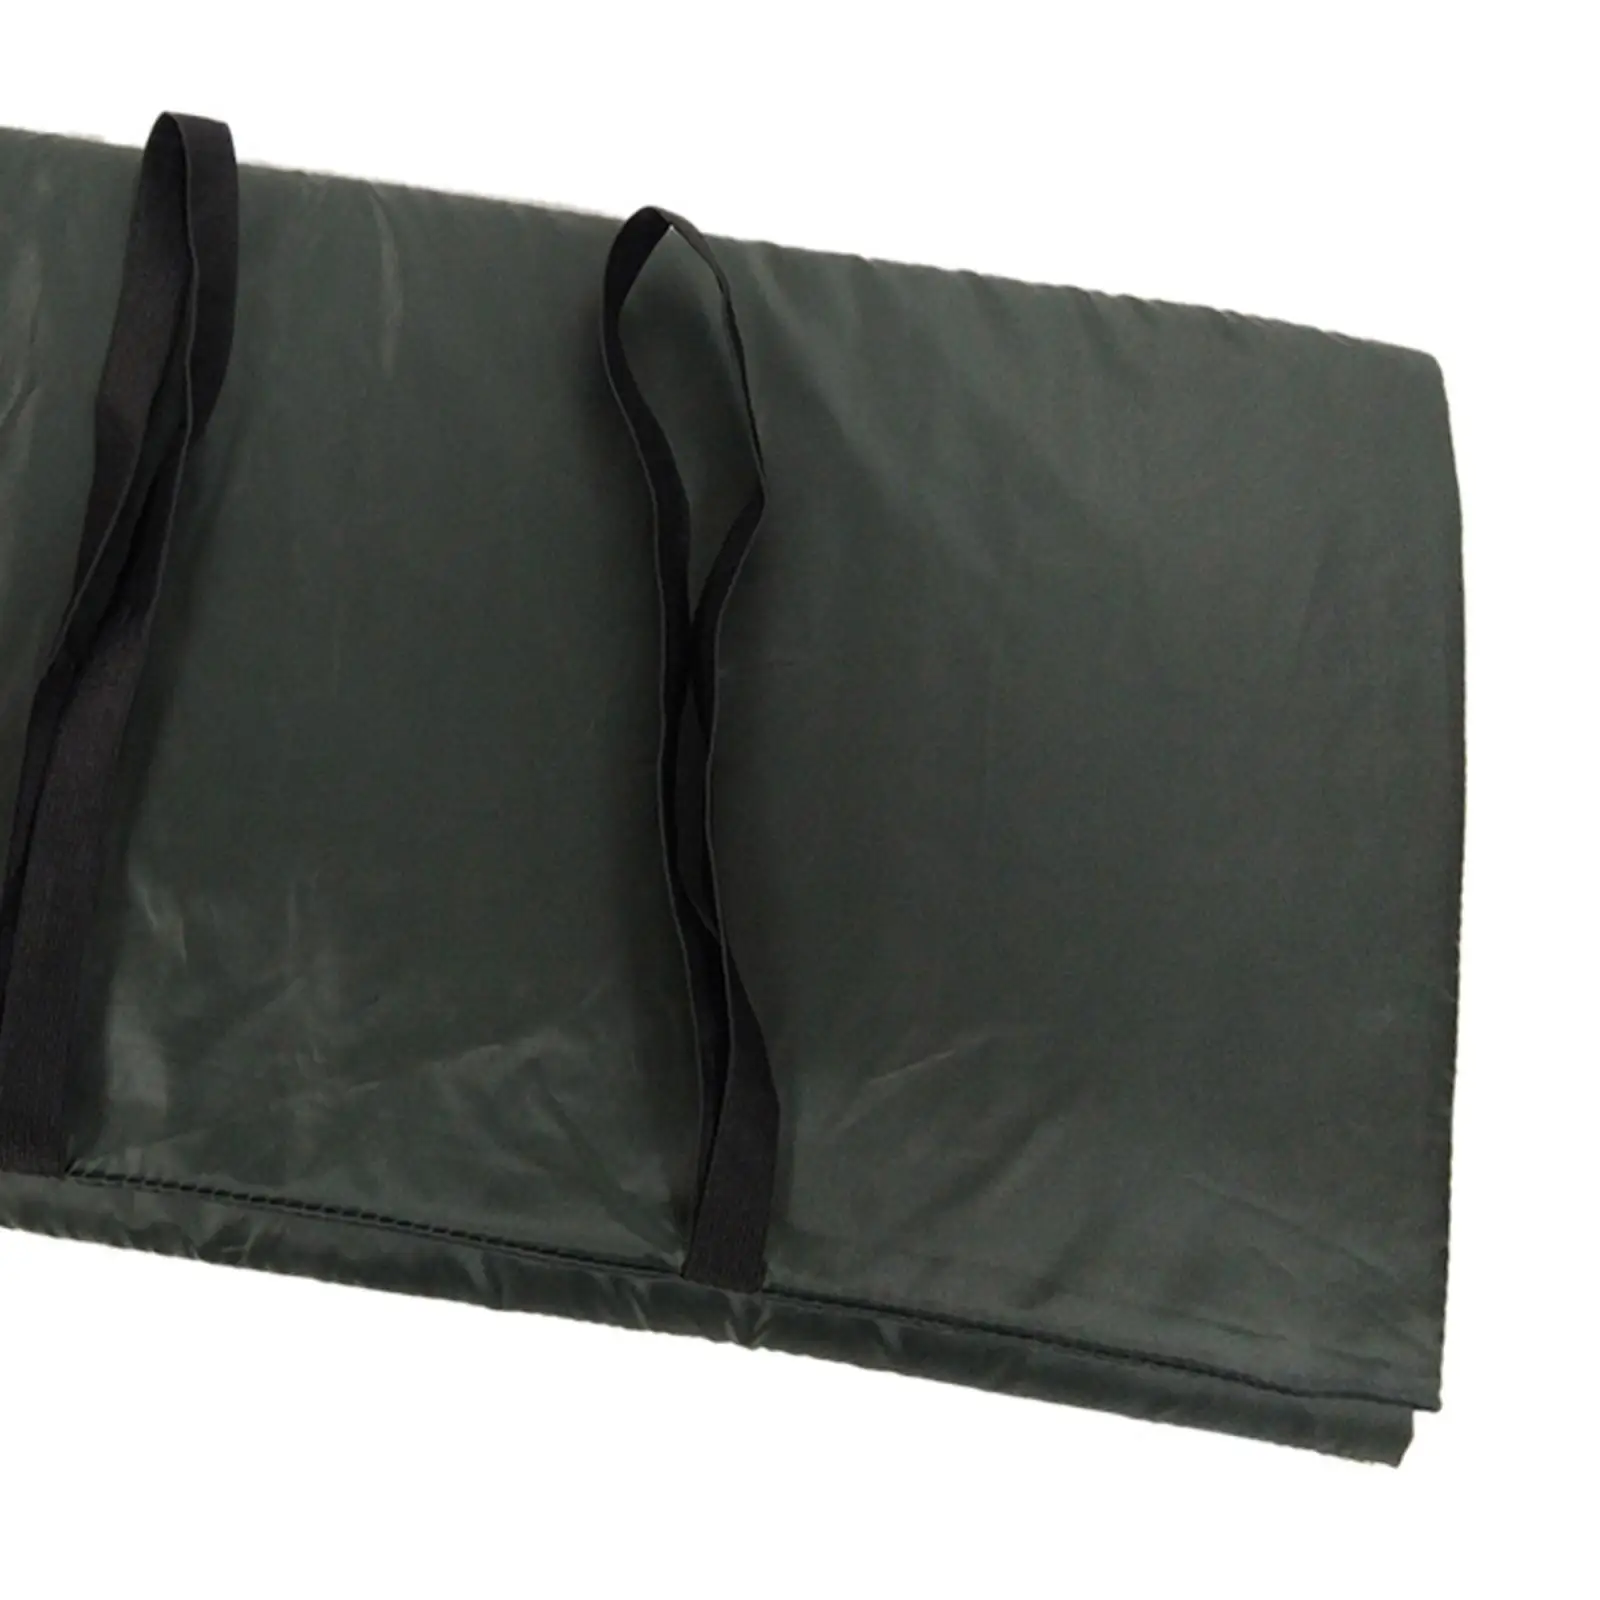 PADDED LARGE UNHOOKING MAT FOLD OVER STRAPS CARP FISHING TACKLE PROTECT PAD